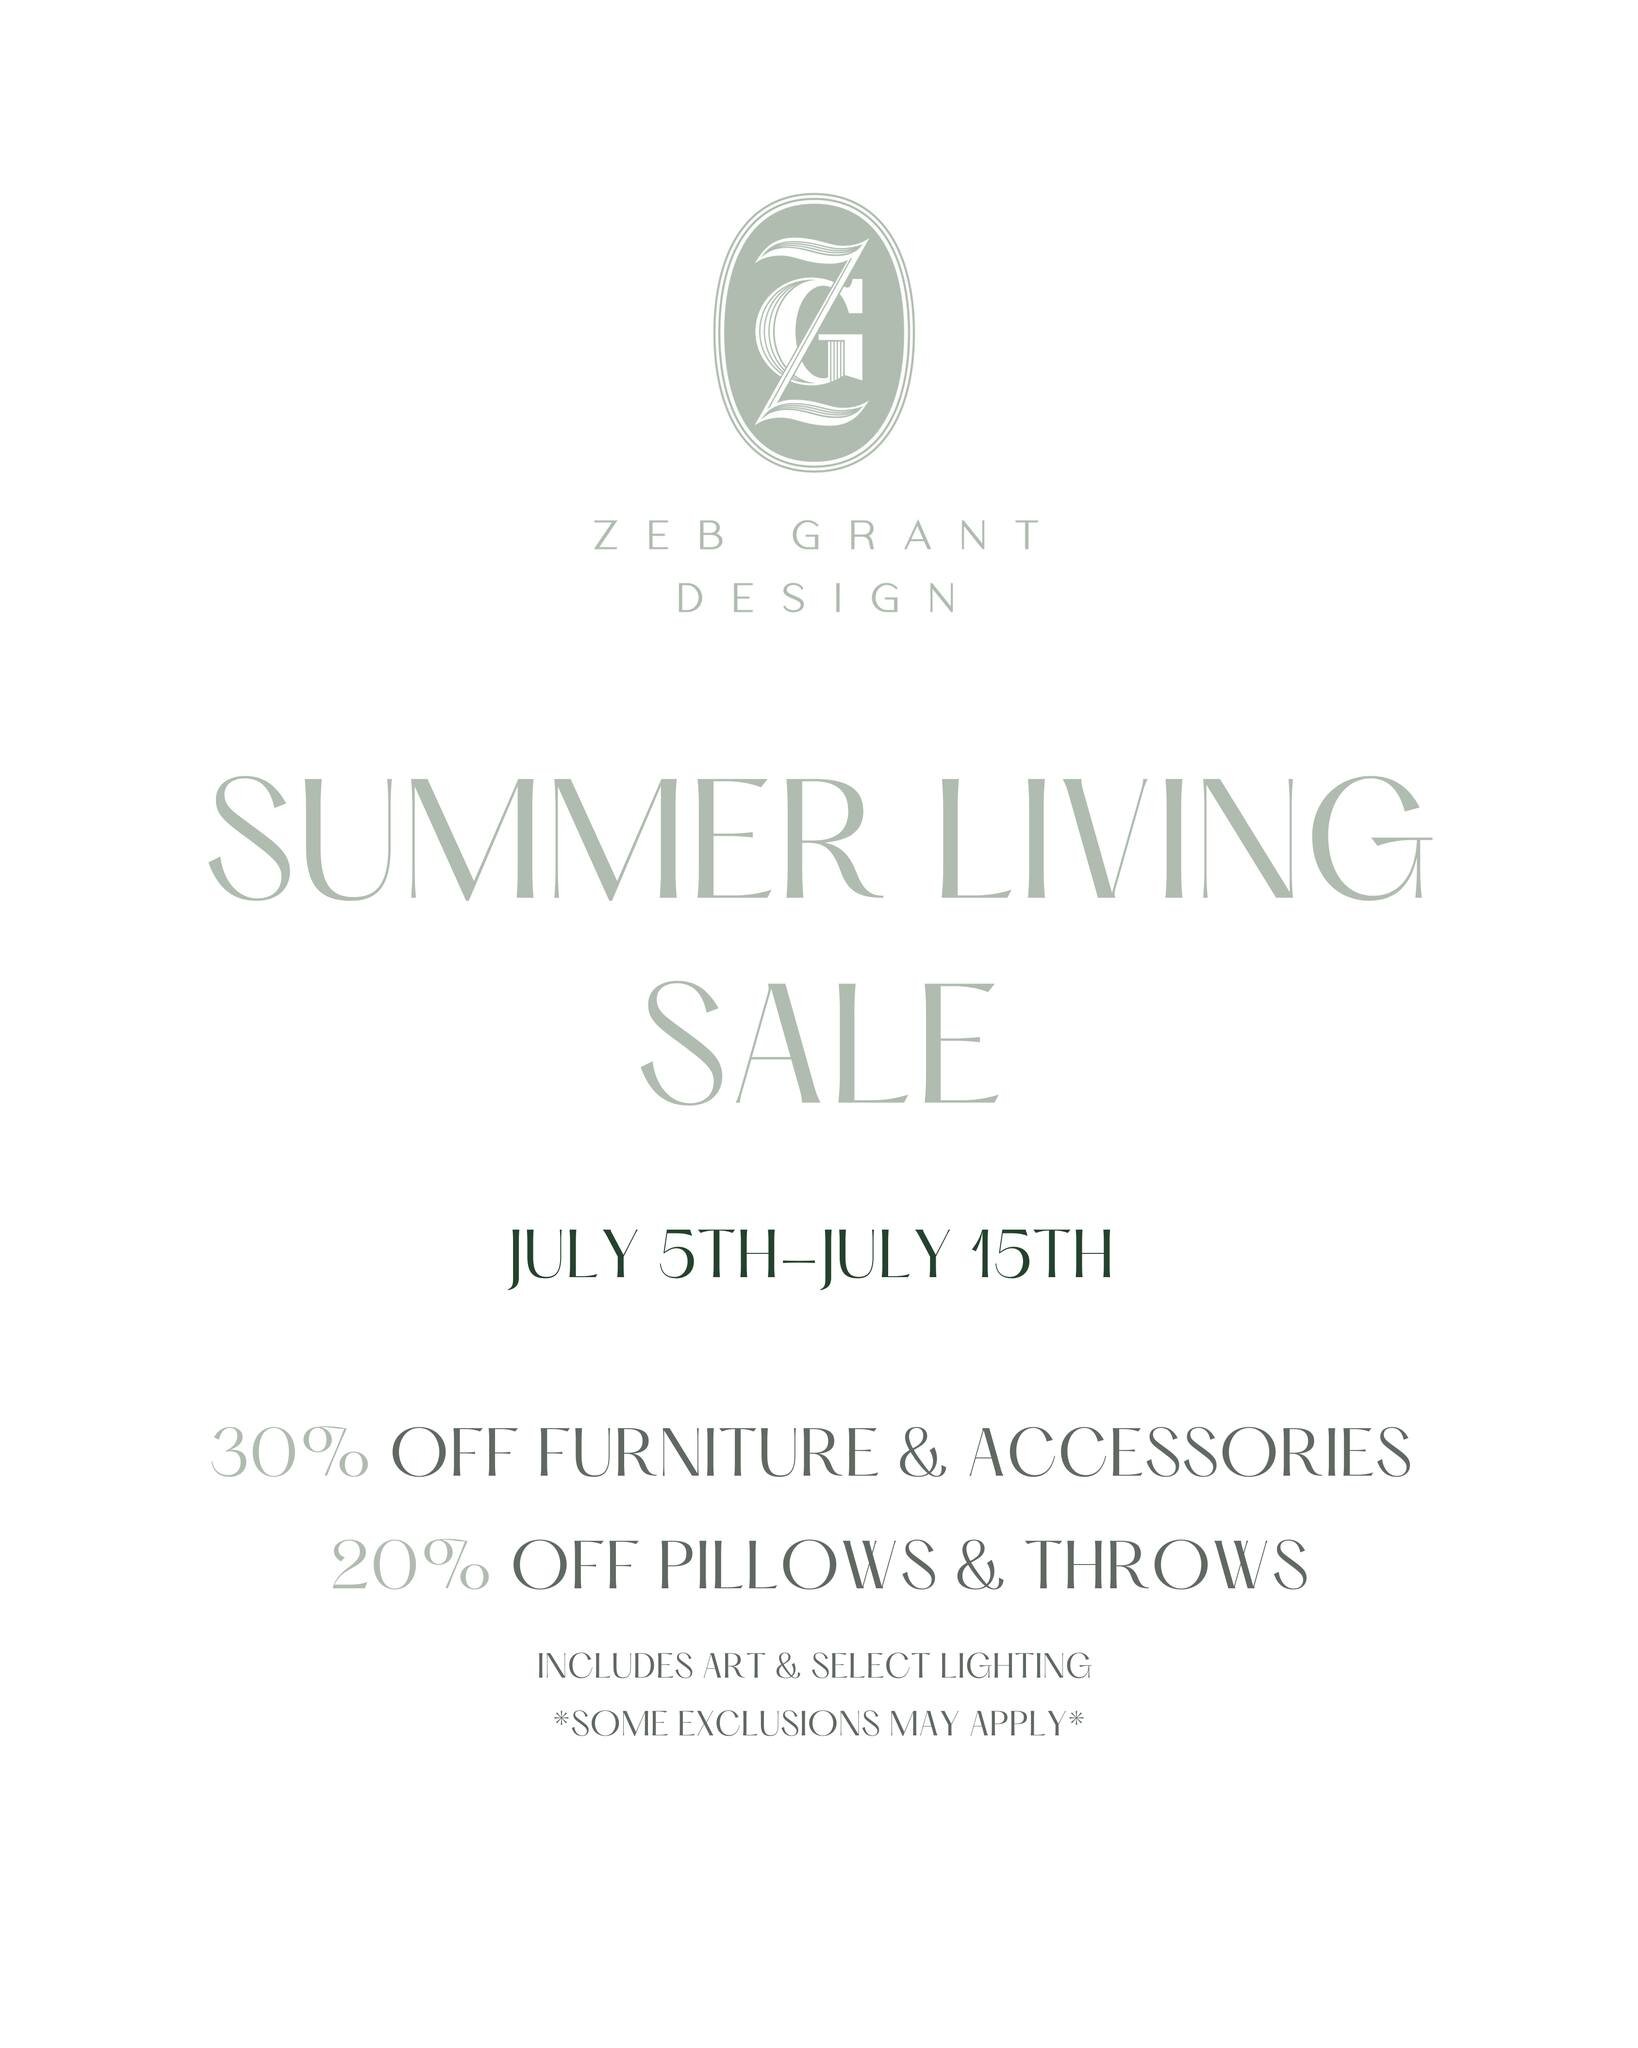 Mark your calendars... July 5th-July 15th we are having our Summer Living Sale! 30% off furniture and accessories and 20% off pillows and throws. This is our biggest sale to date so you don't want to miss it! Items from our warehouse that haven't tou